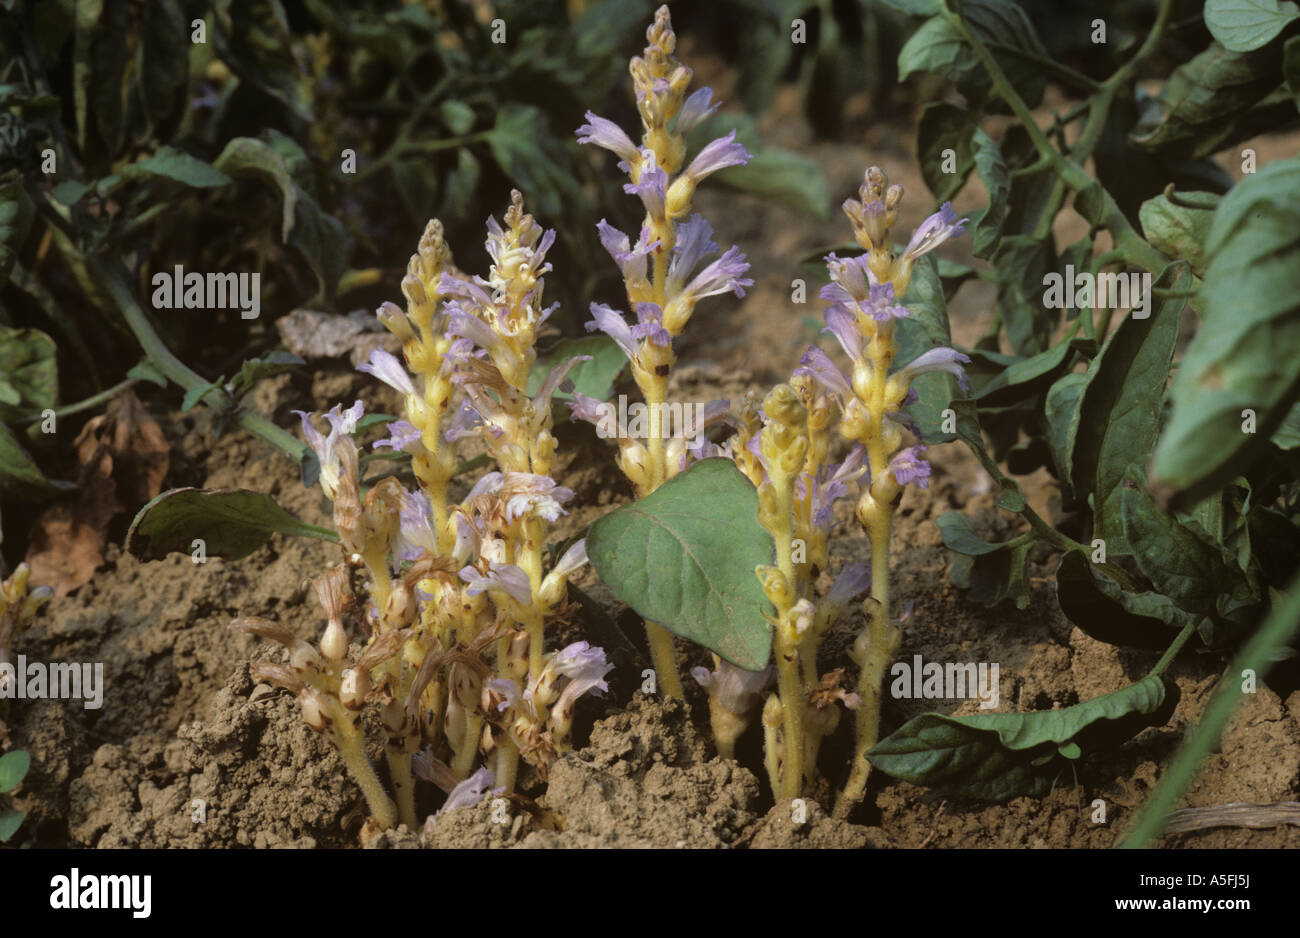 Branched broomrape Orobanche ramosa flowering plants parasitic on a tomato crop Stock Photo